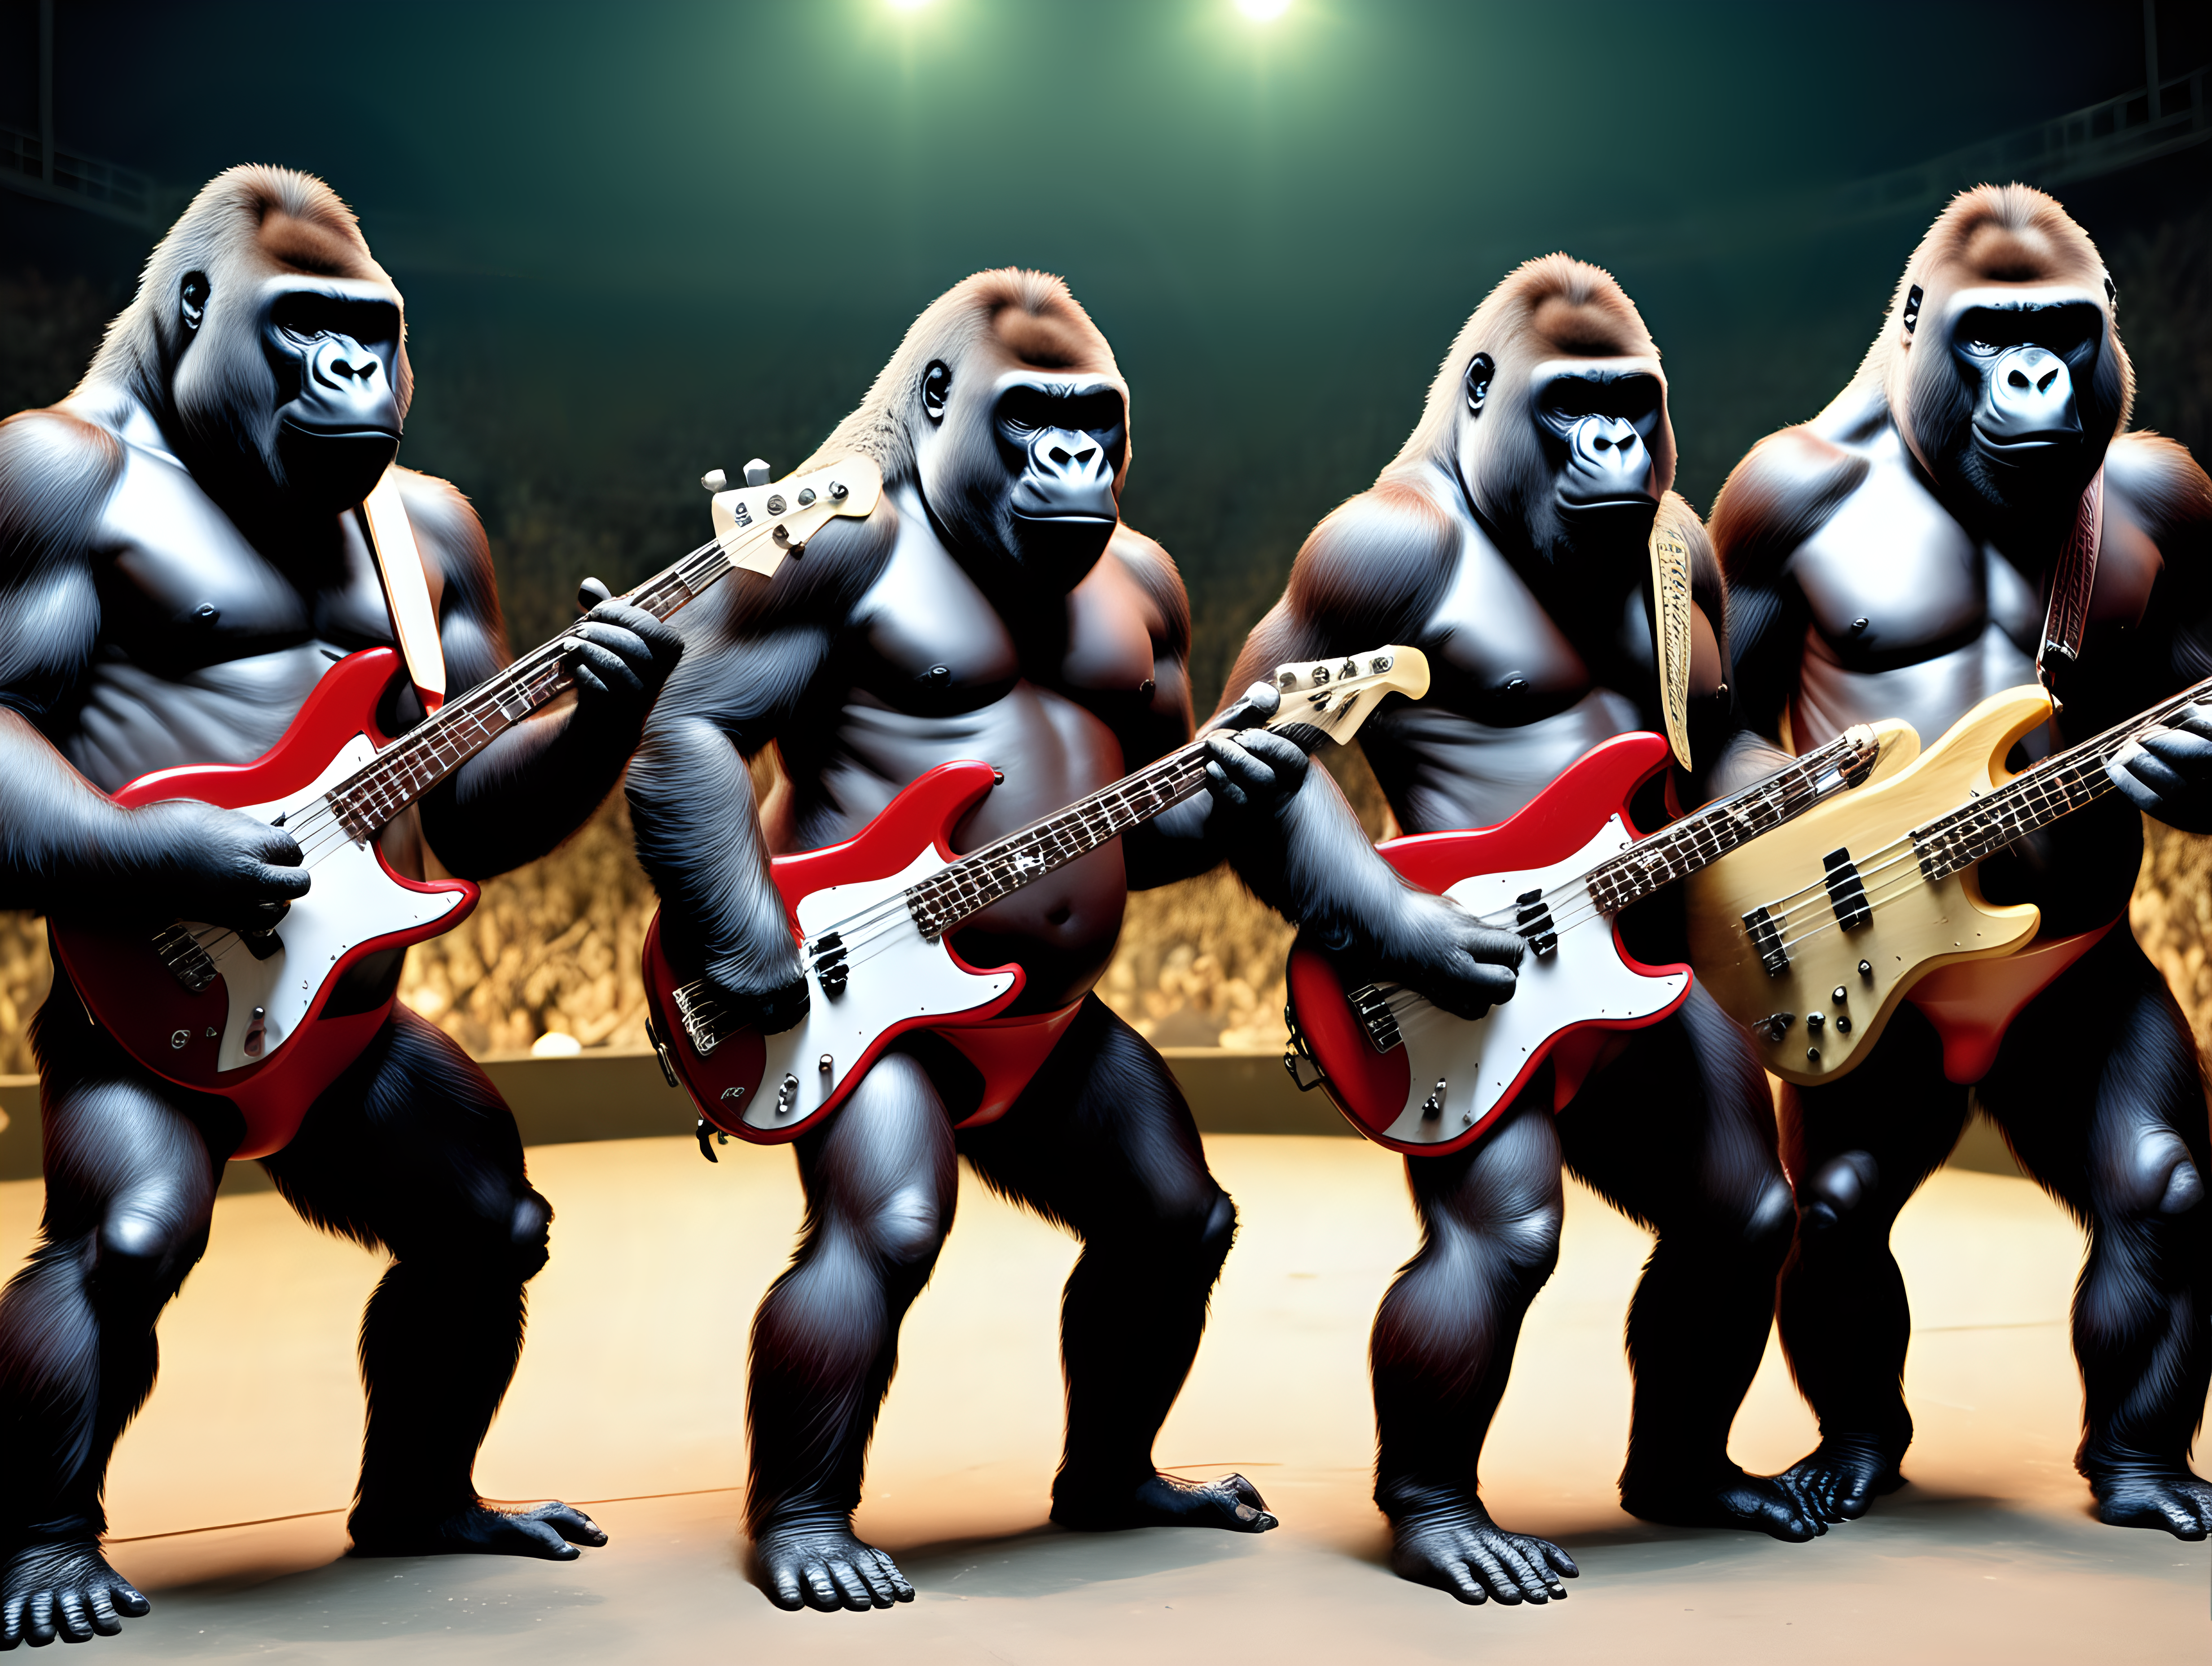 5 gorillas in bathing suits playing bass guitars